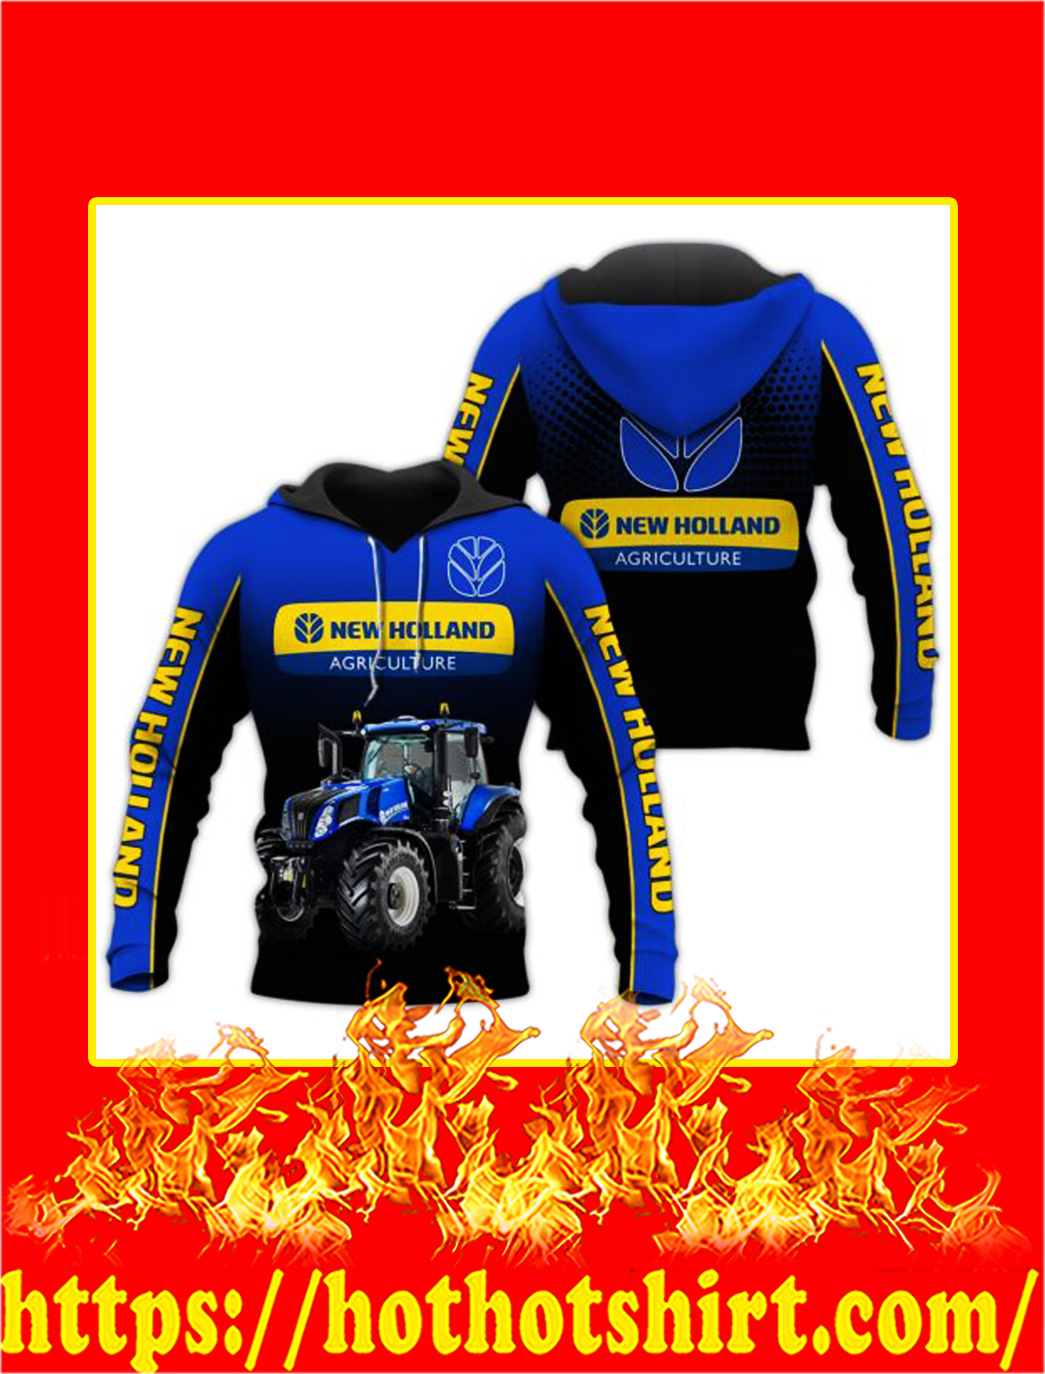 Tractor New Holland Agriculture 3D All Over Printed hoodie